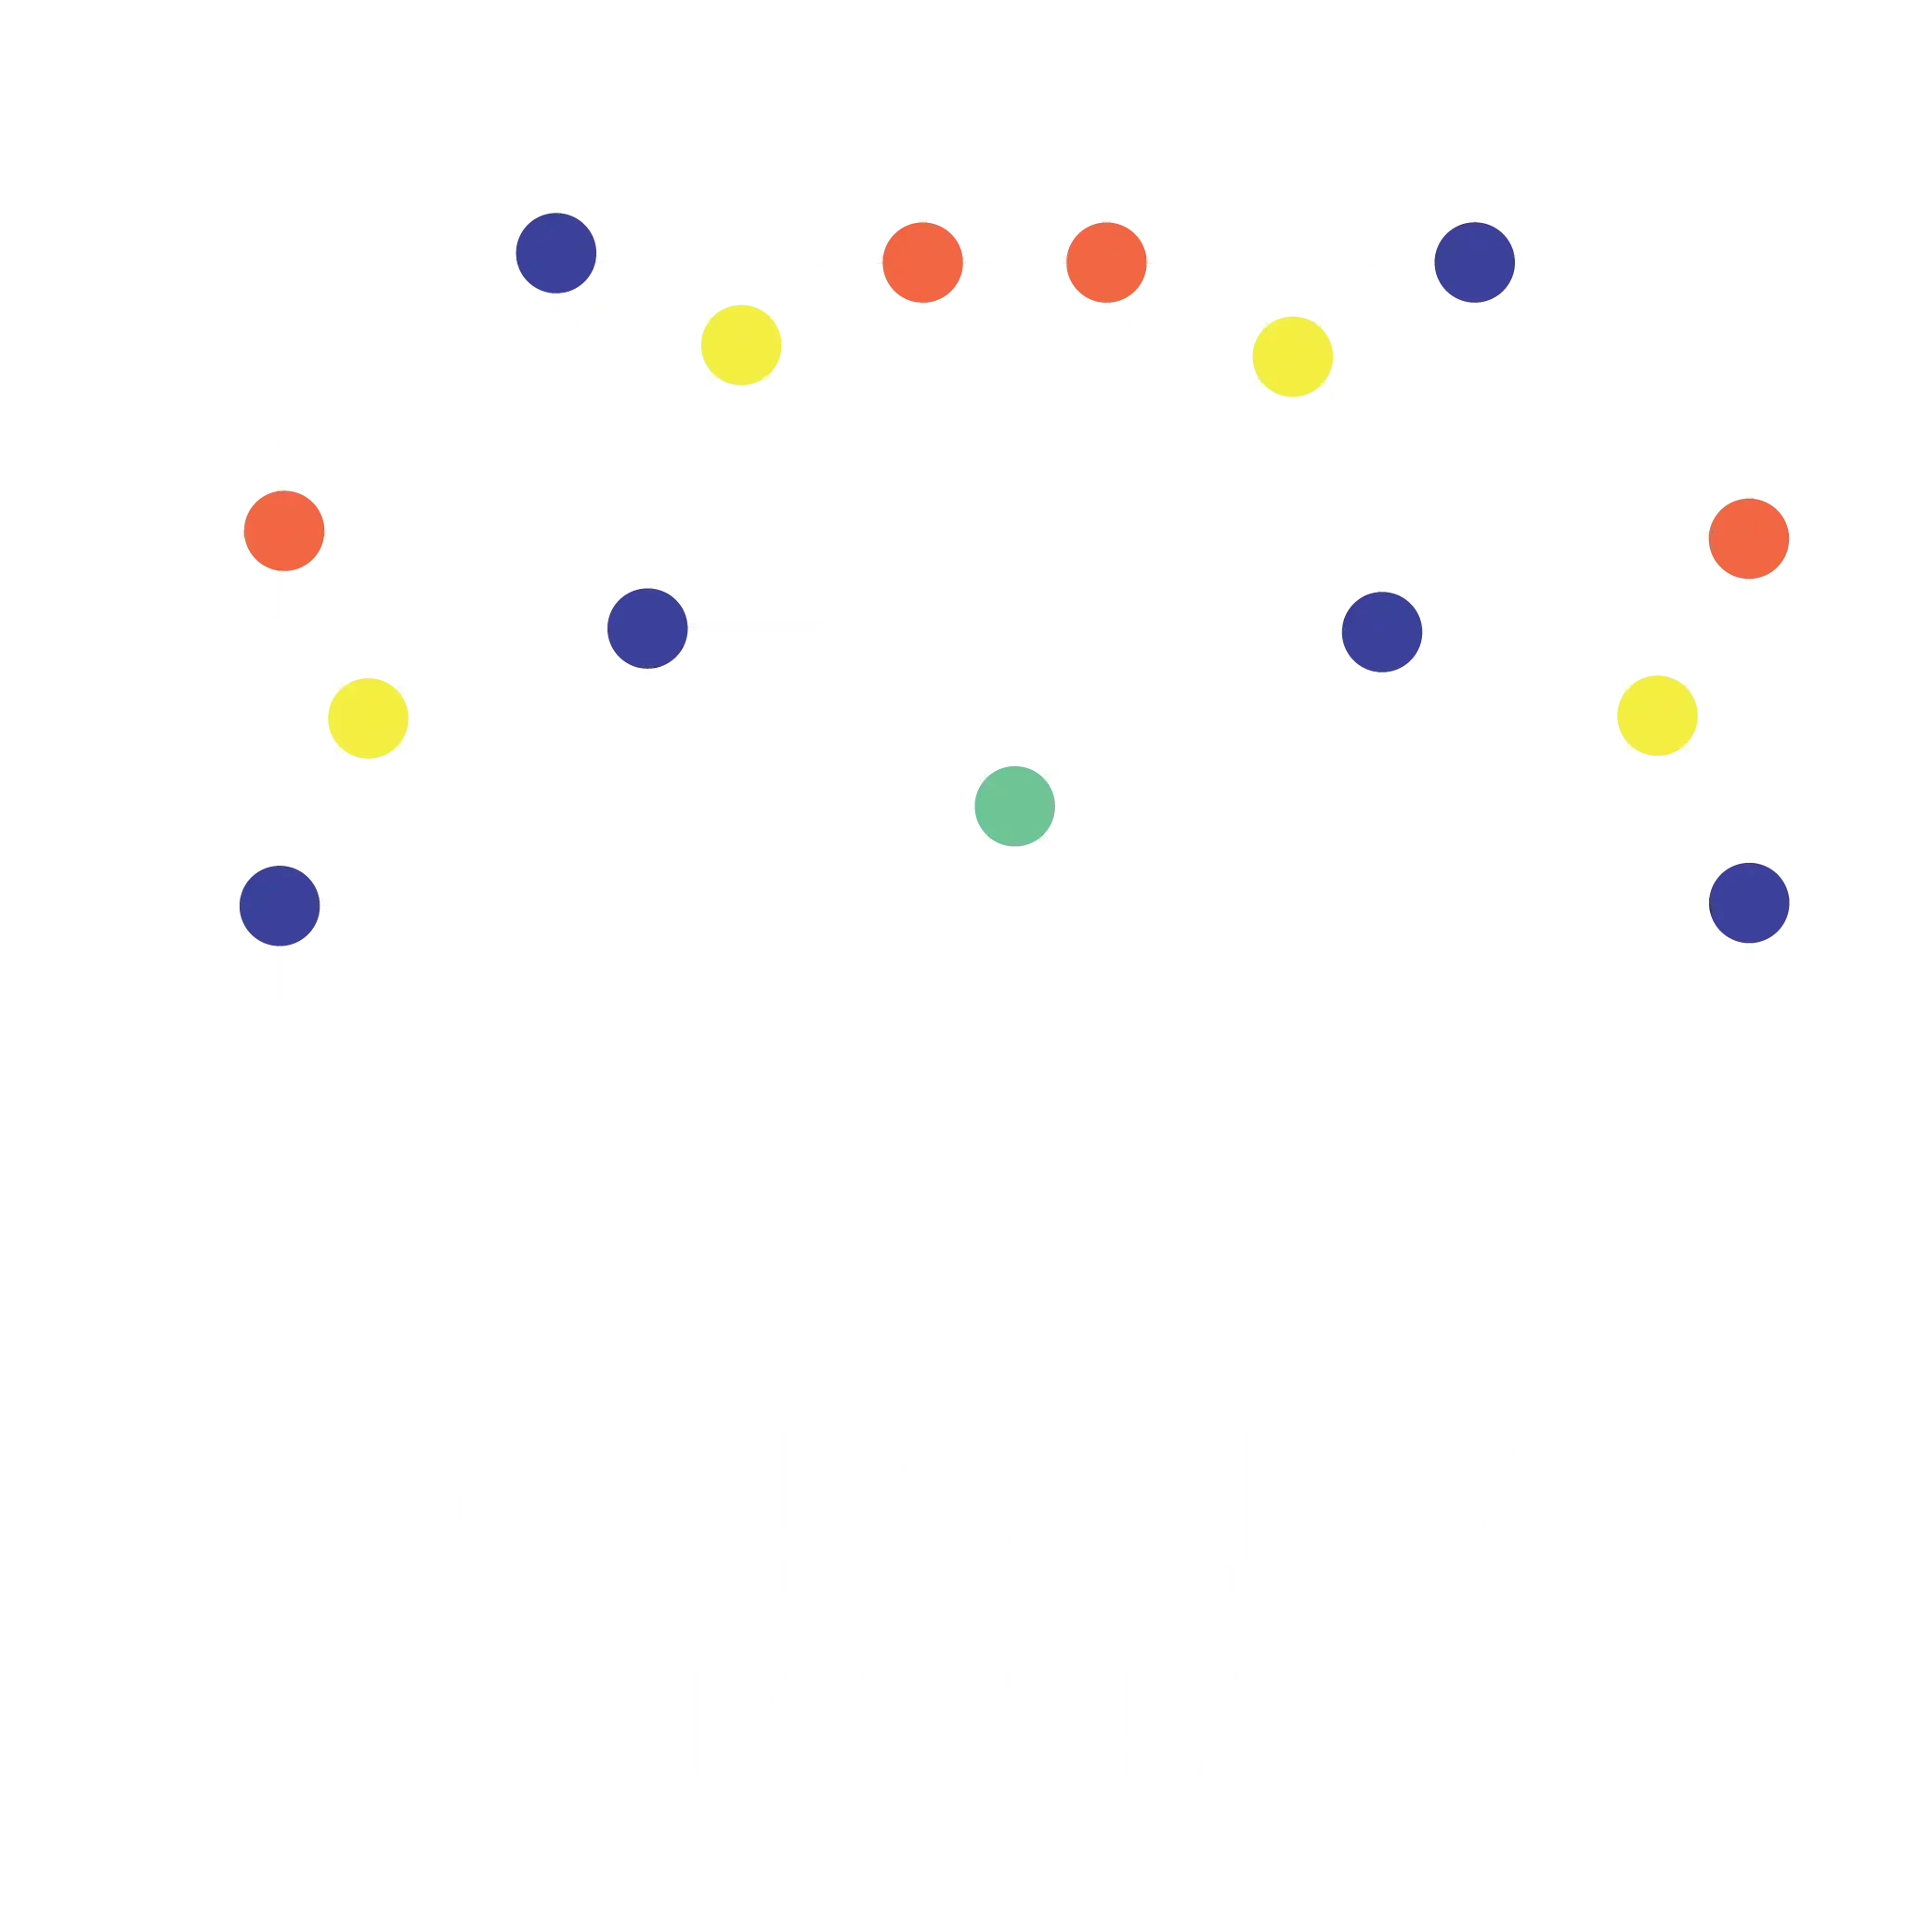 Ecolonical LAB